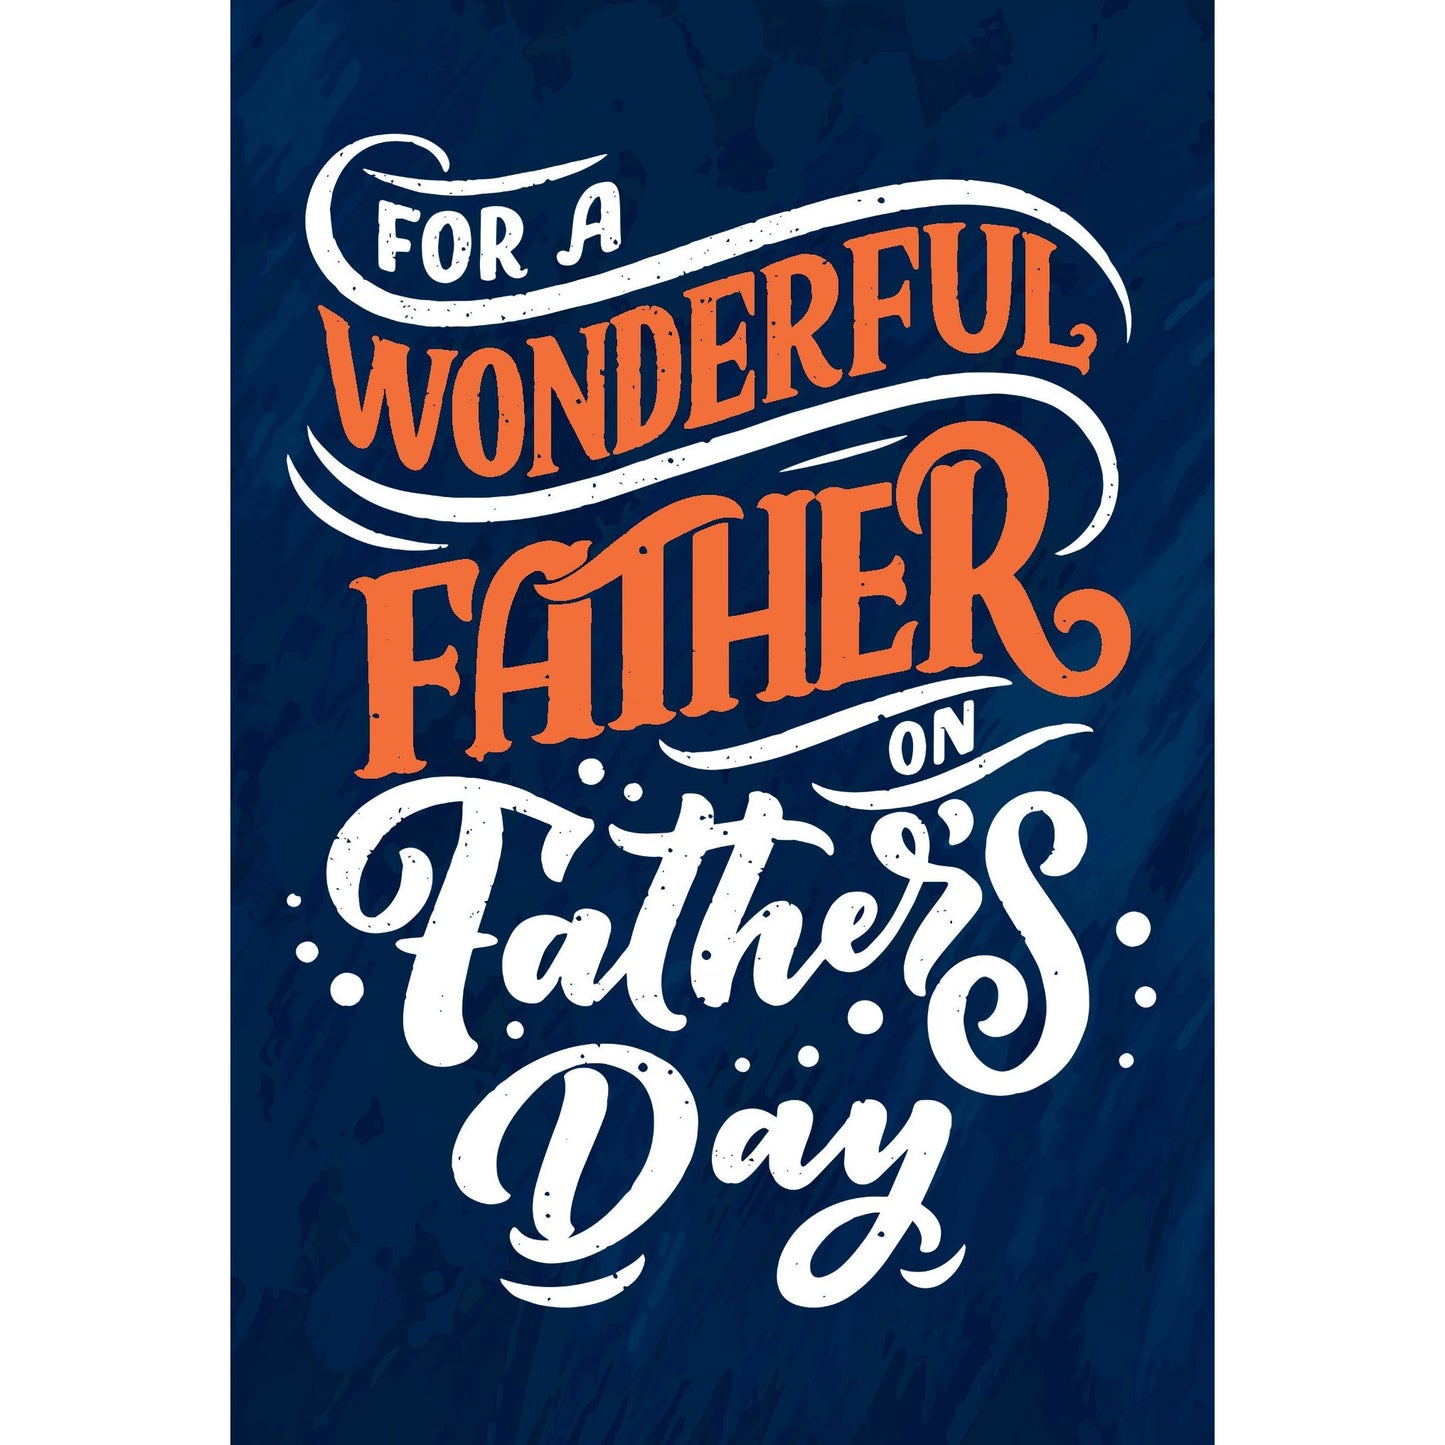 Wonderful Father's Day Card - Cardmore